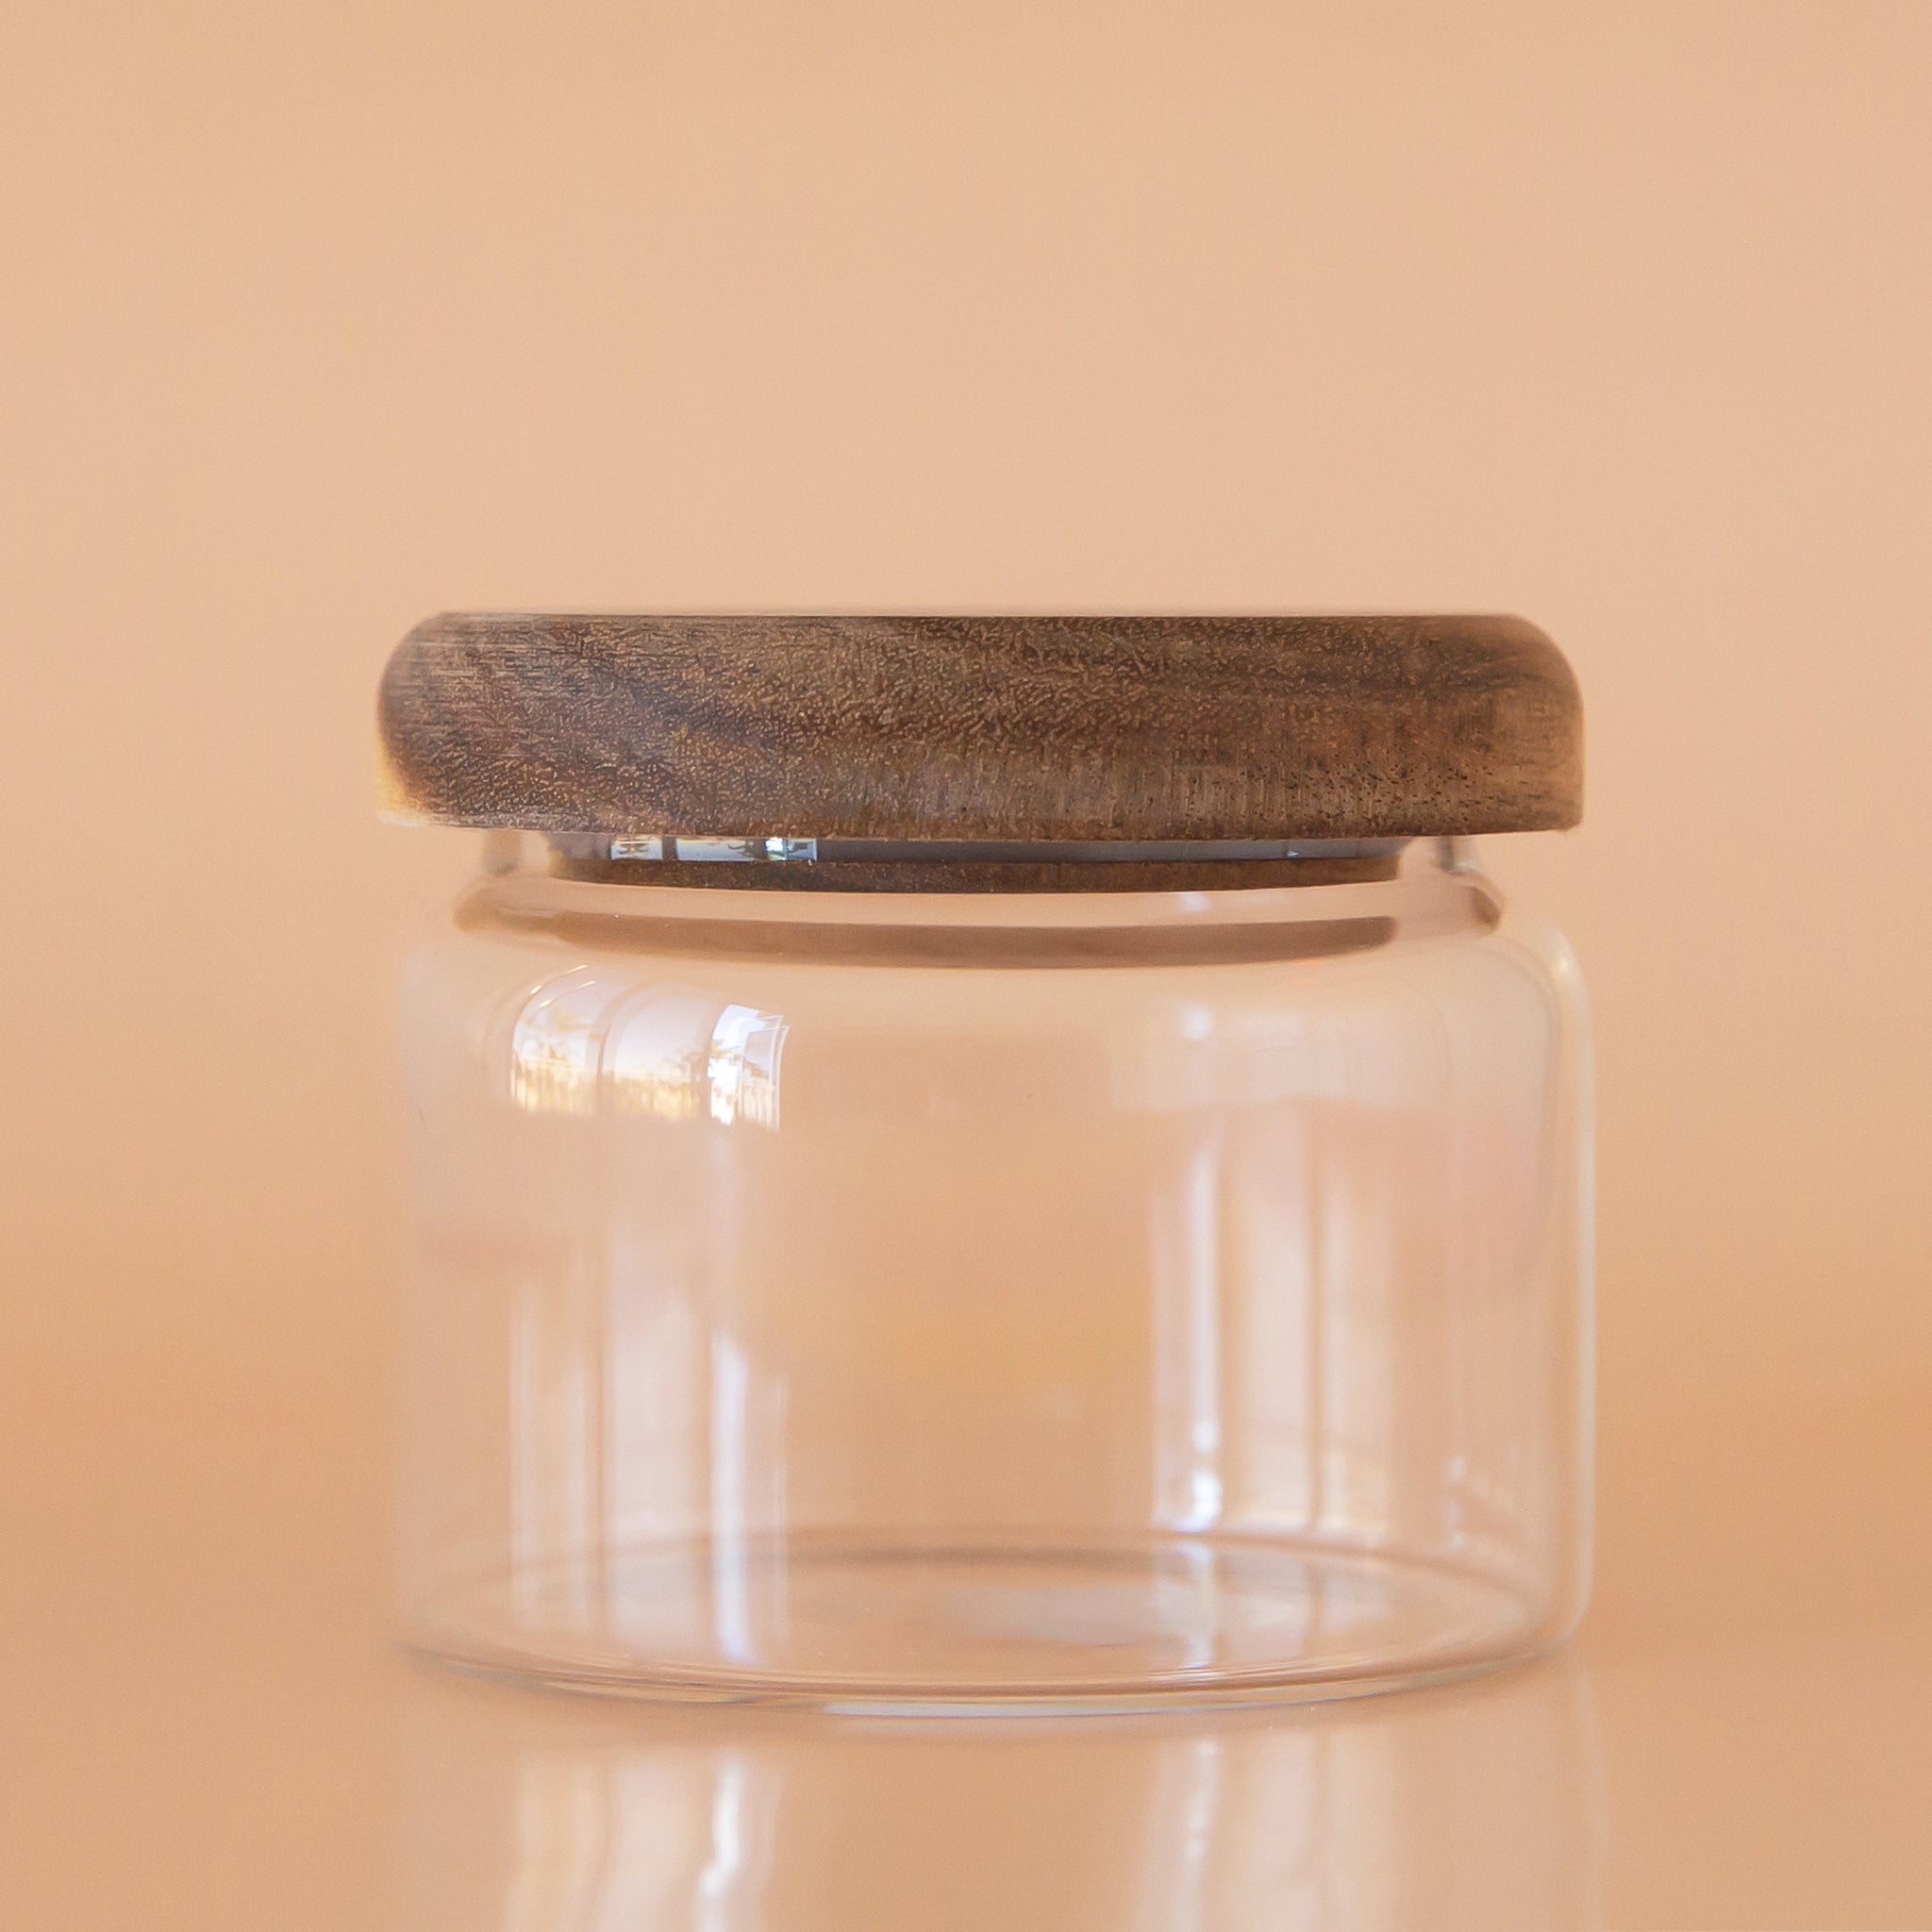 On a peach background is a clear glass storage canister with an acacia wood lid.